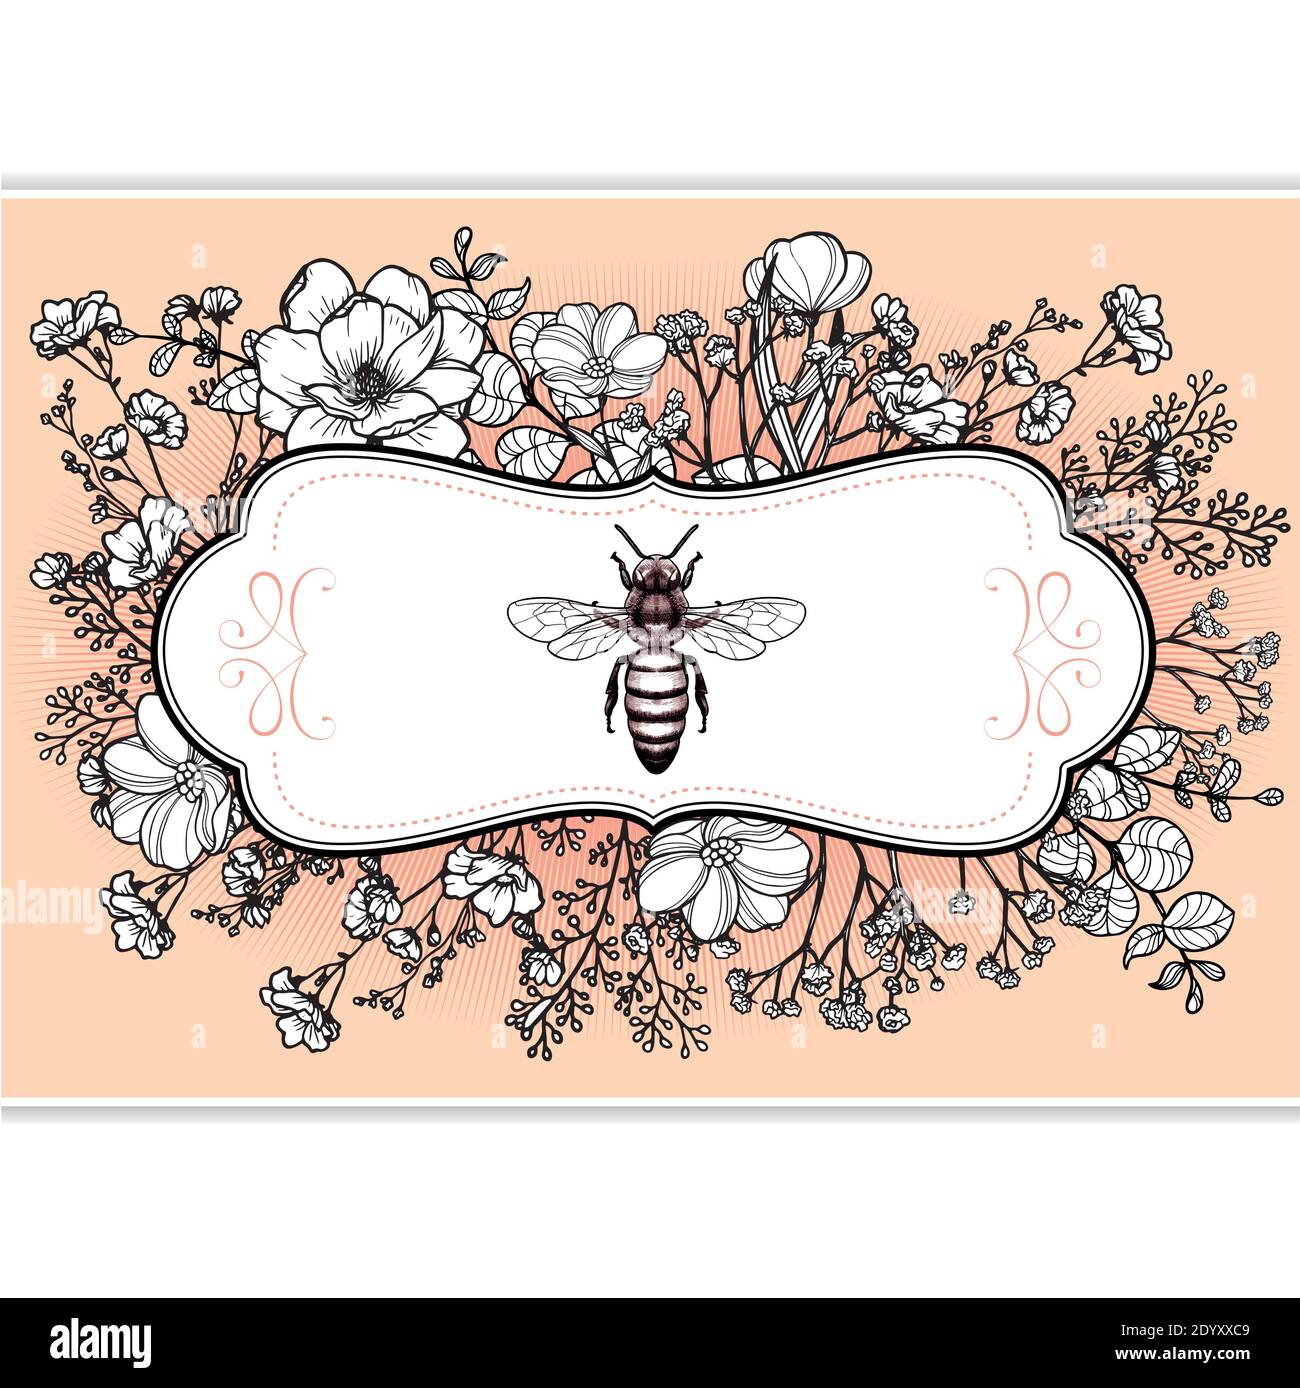 Elegant vintage victorian herbal apothecary label with queen bee and flowers Stock Vector